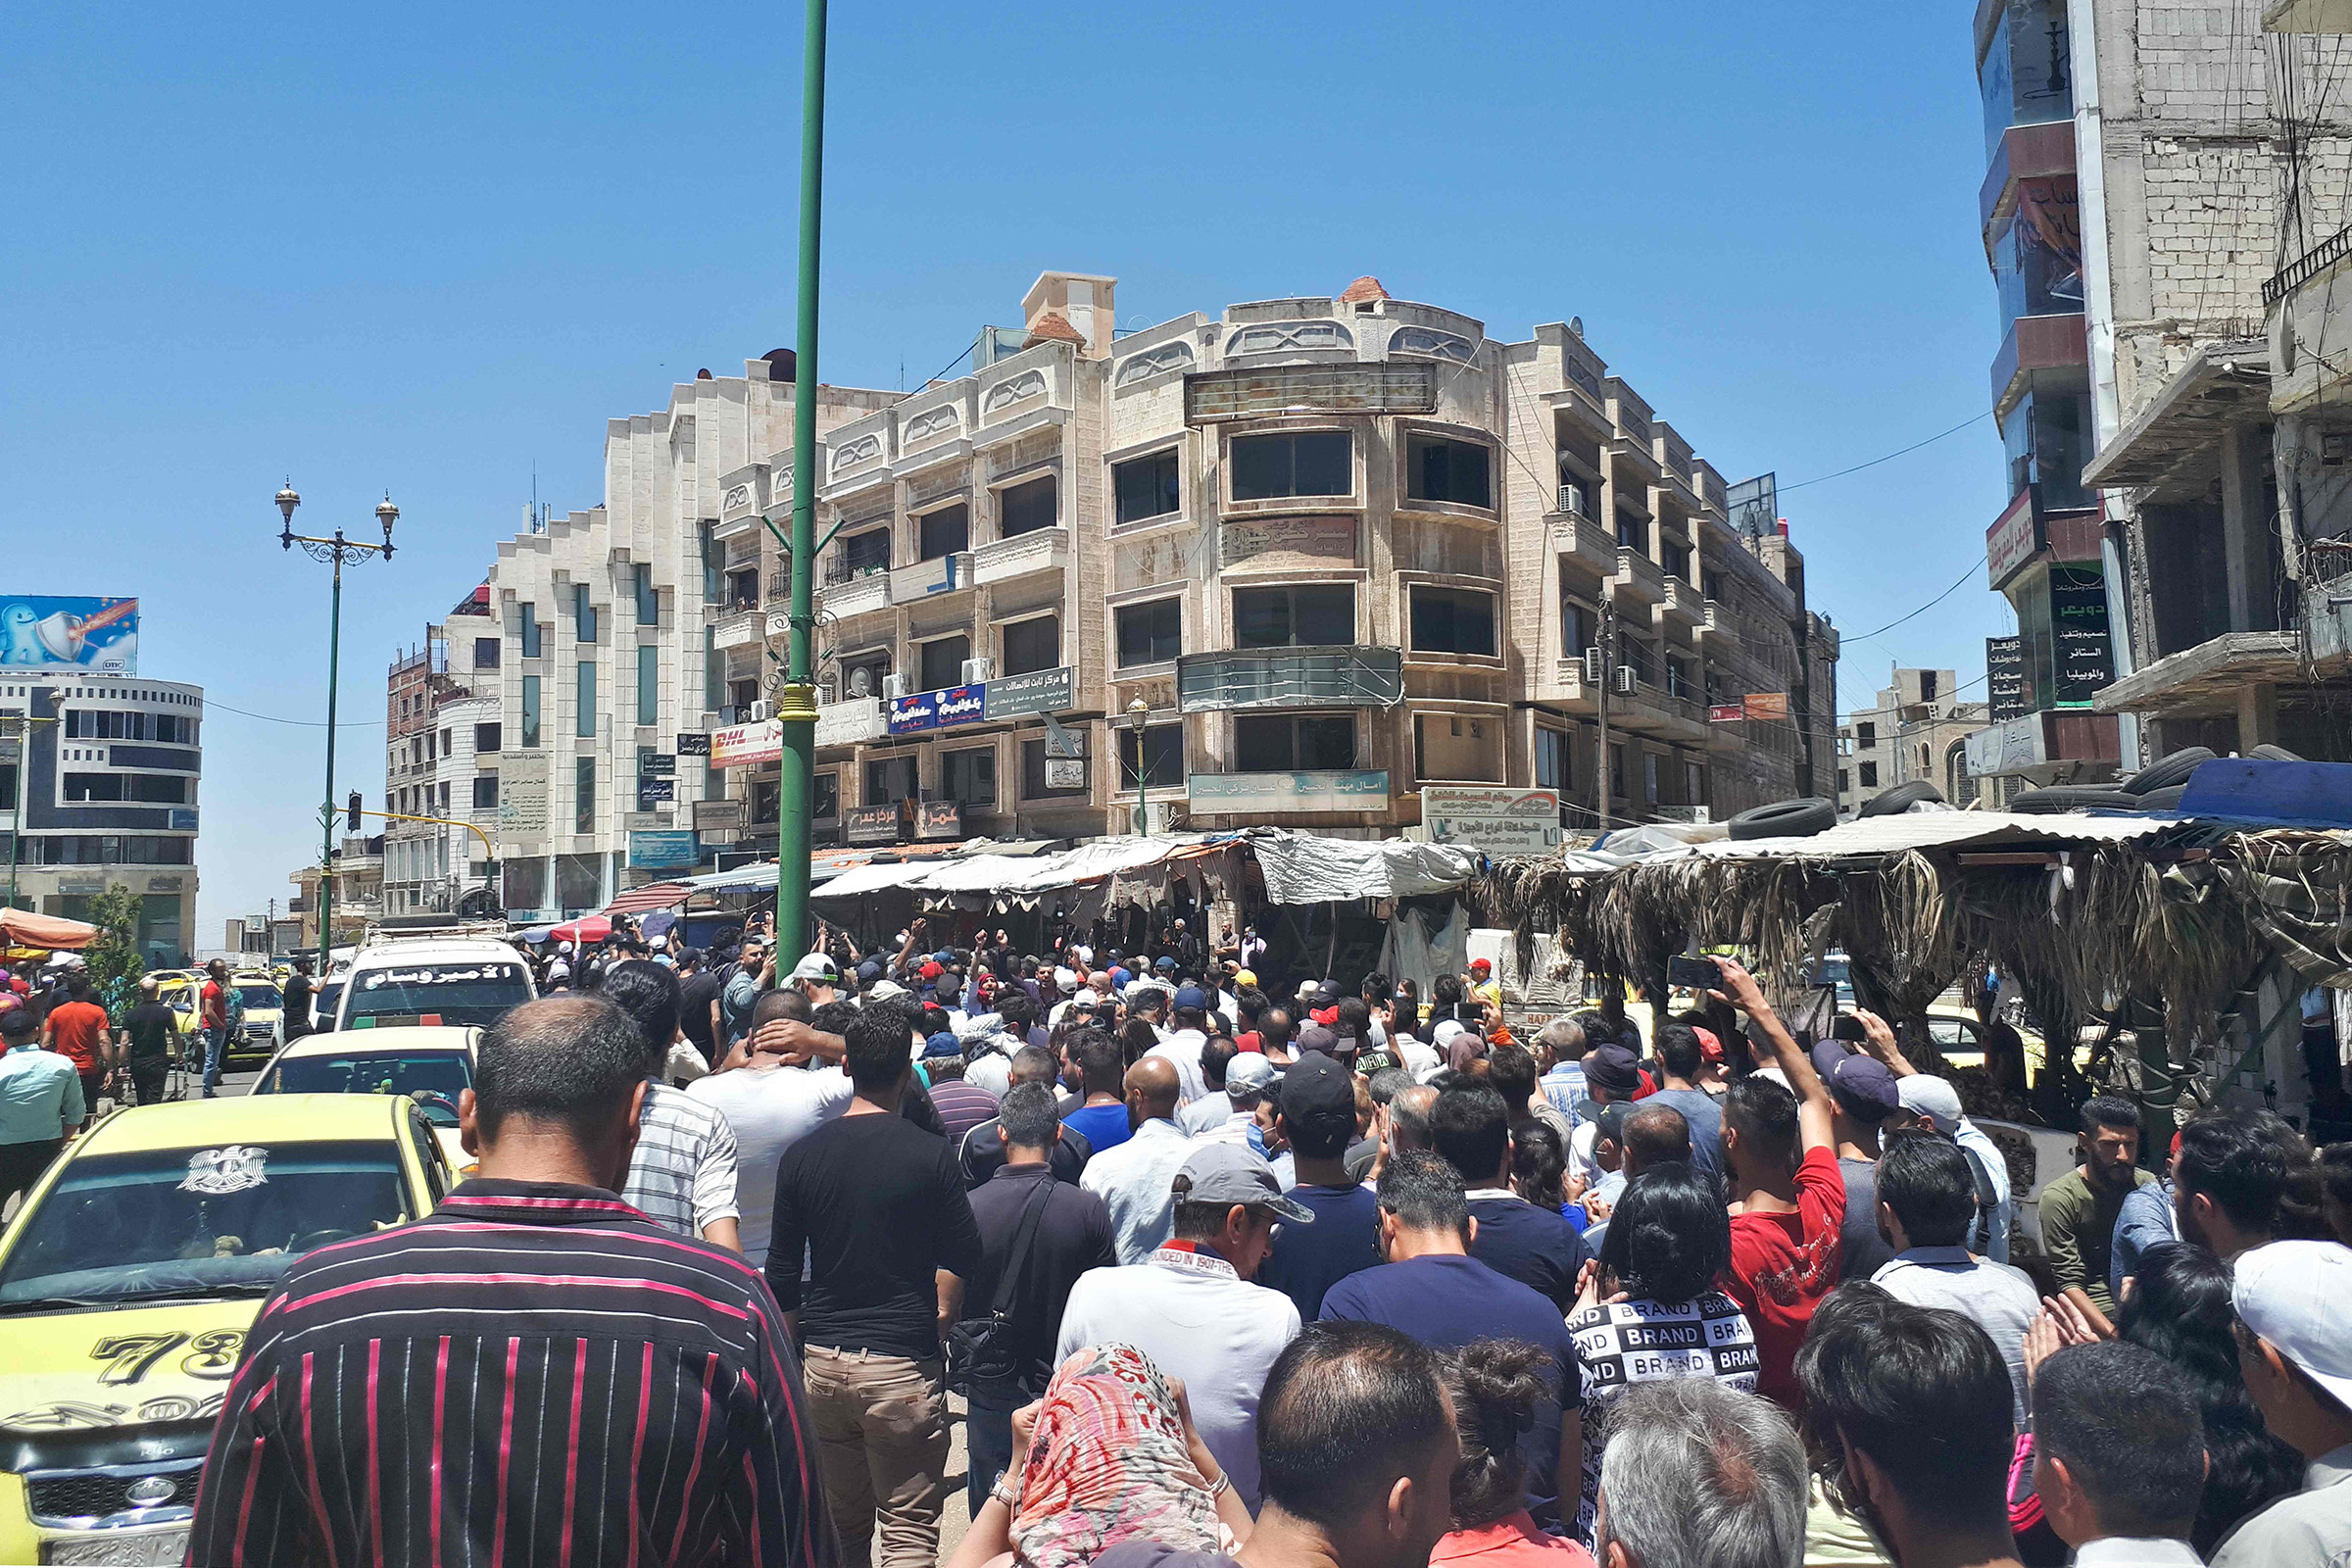 Protestors chant anti-government slogans in Suwaida, Syria on June 9, 2020. (Handout/SUWAYDA24/AFP/Getty Images)